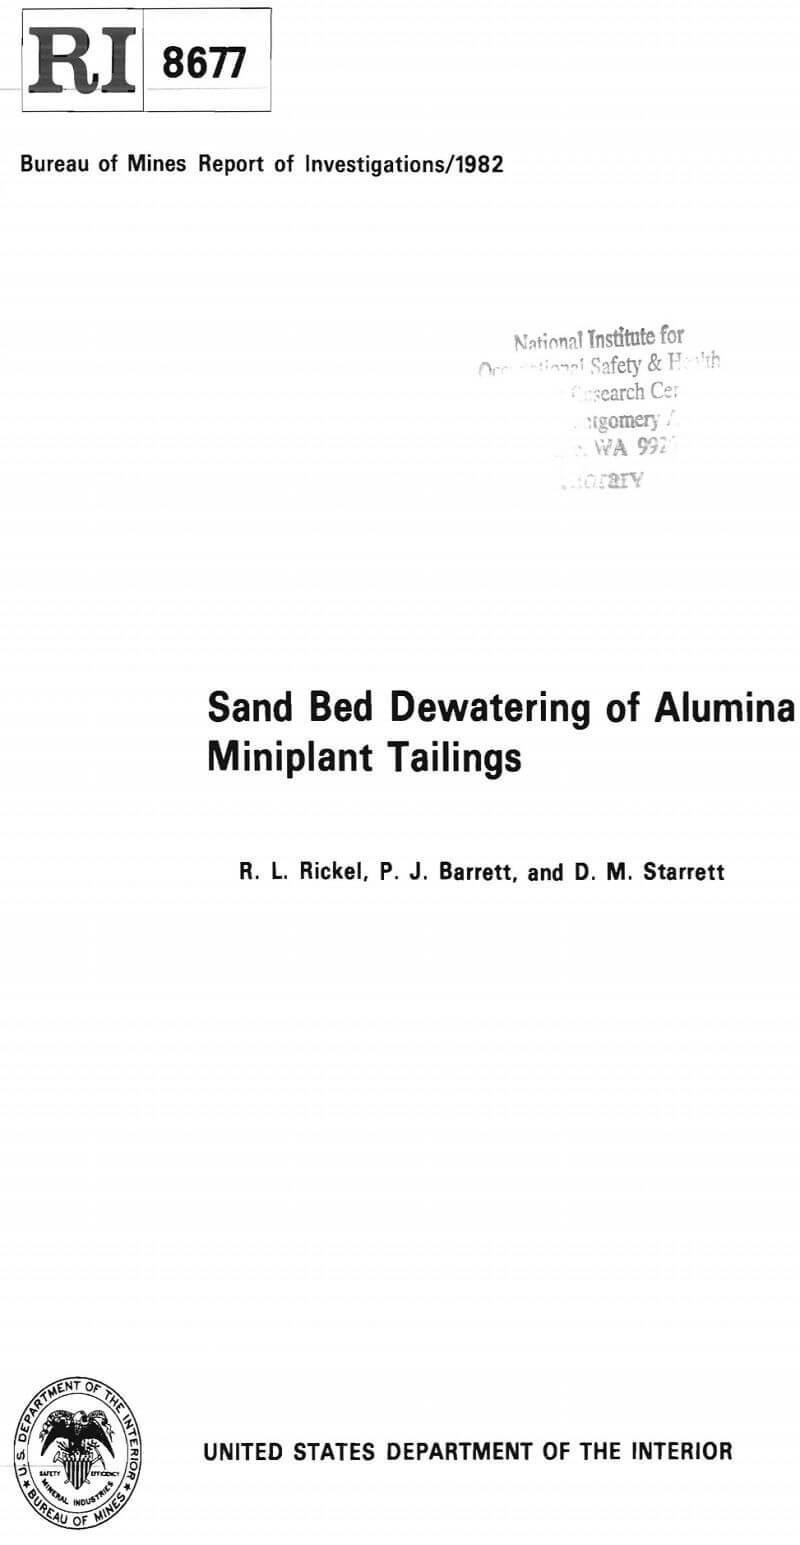 sand bed dewatering of alumina miniplant tailings